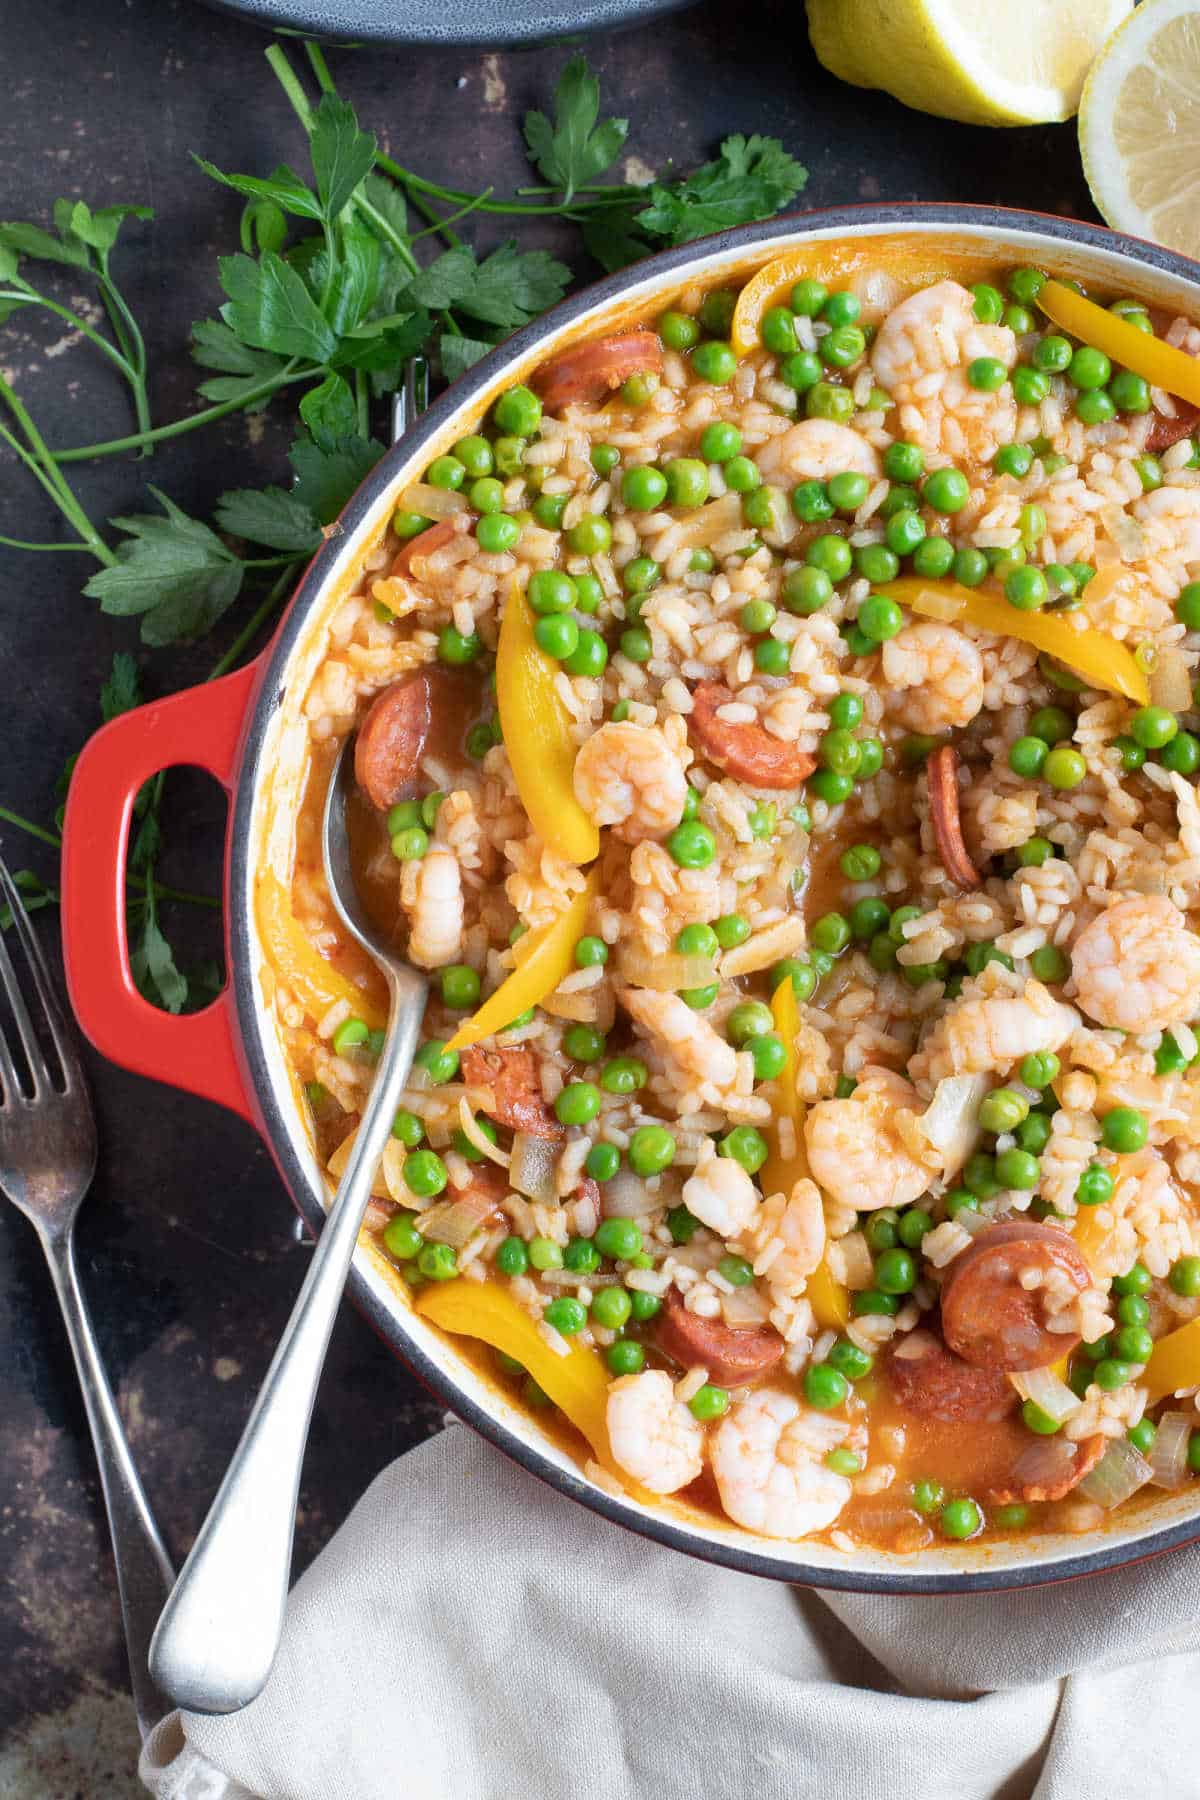 Prawn paella with peas and chorizo in a red pan.